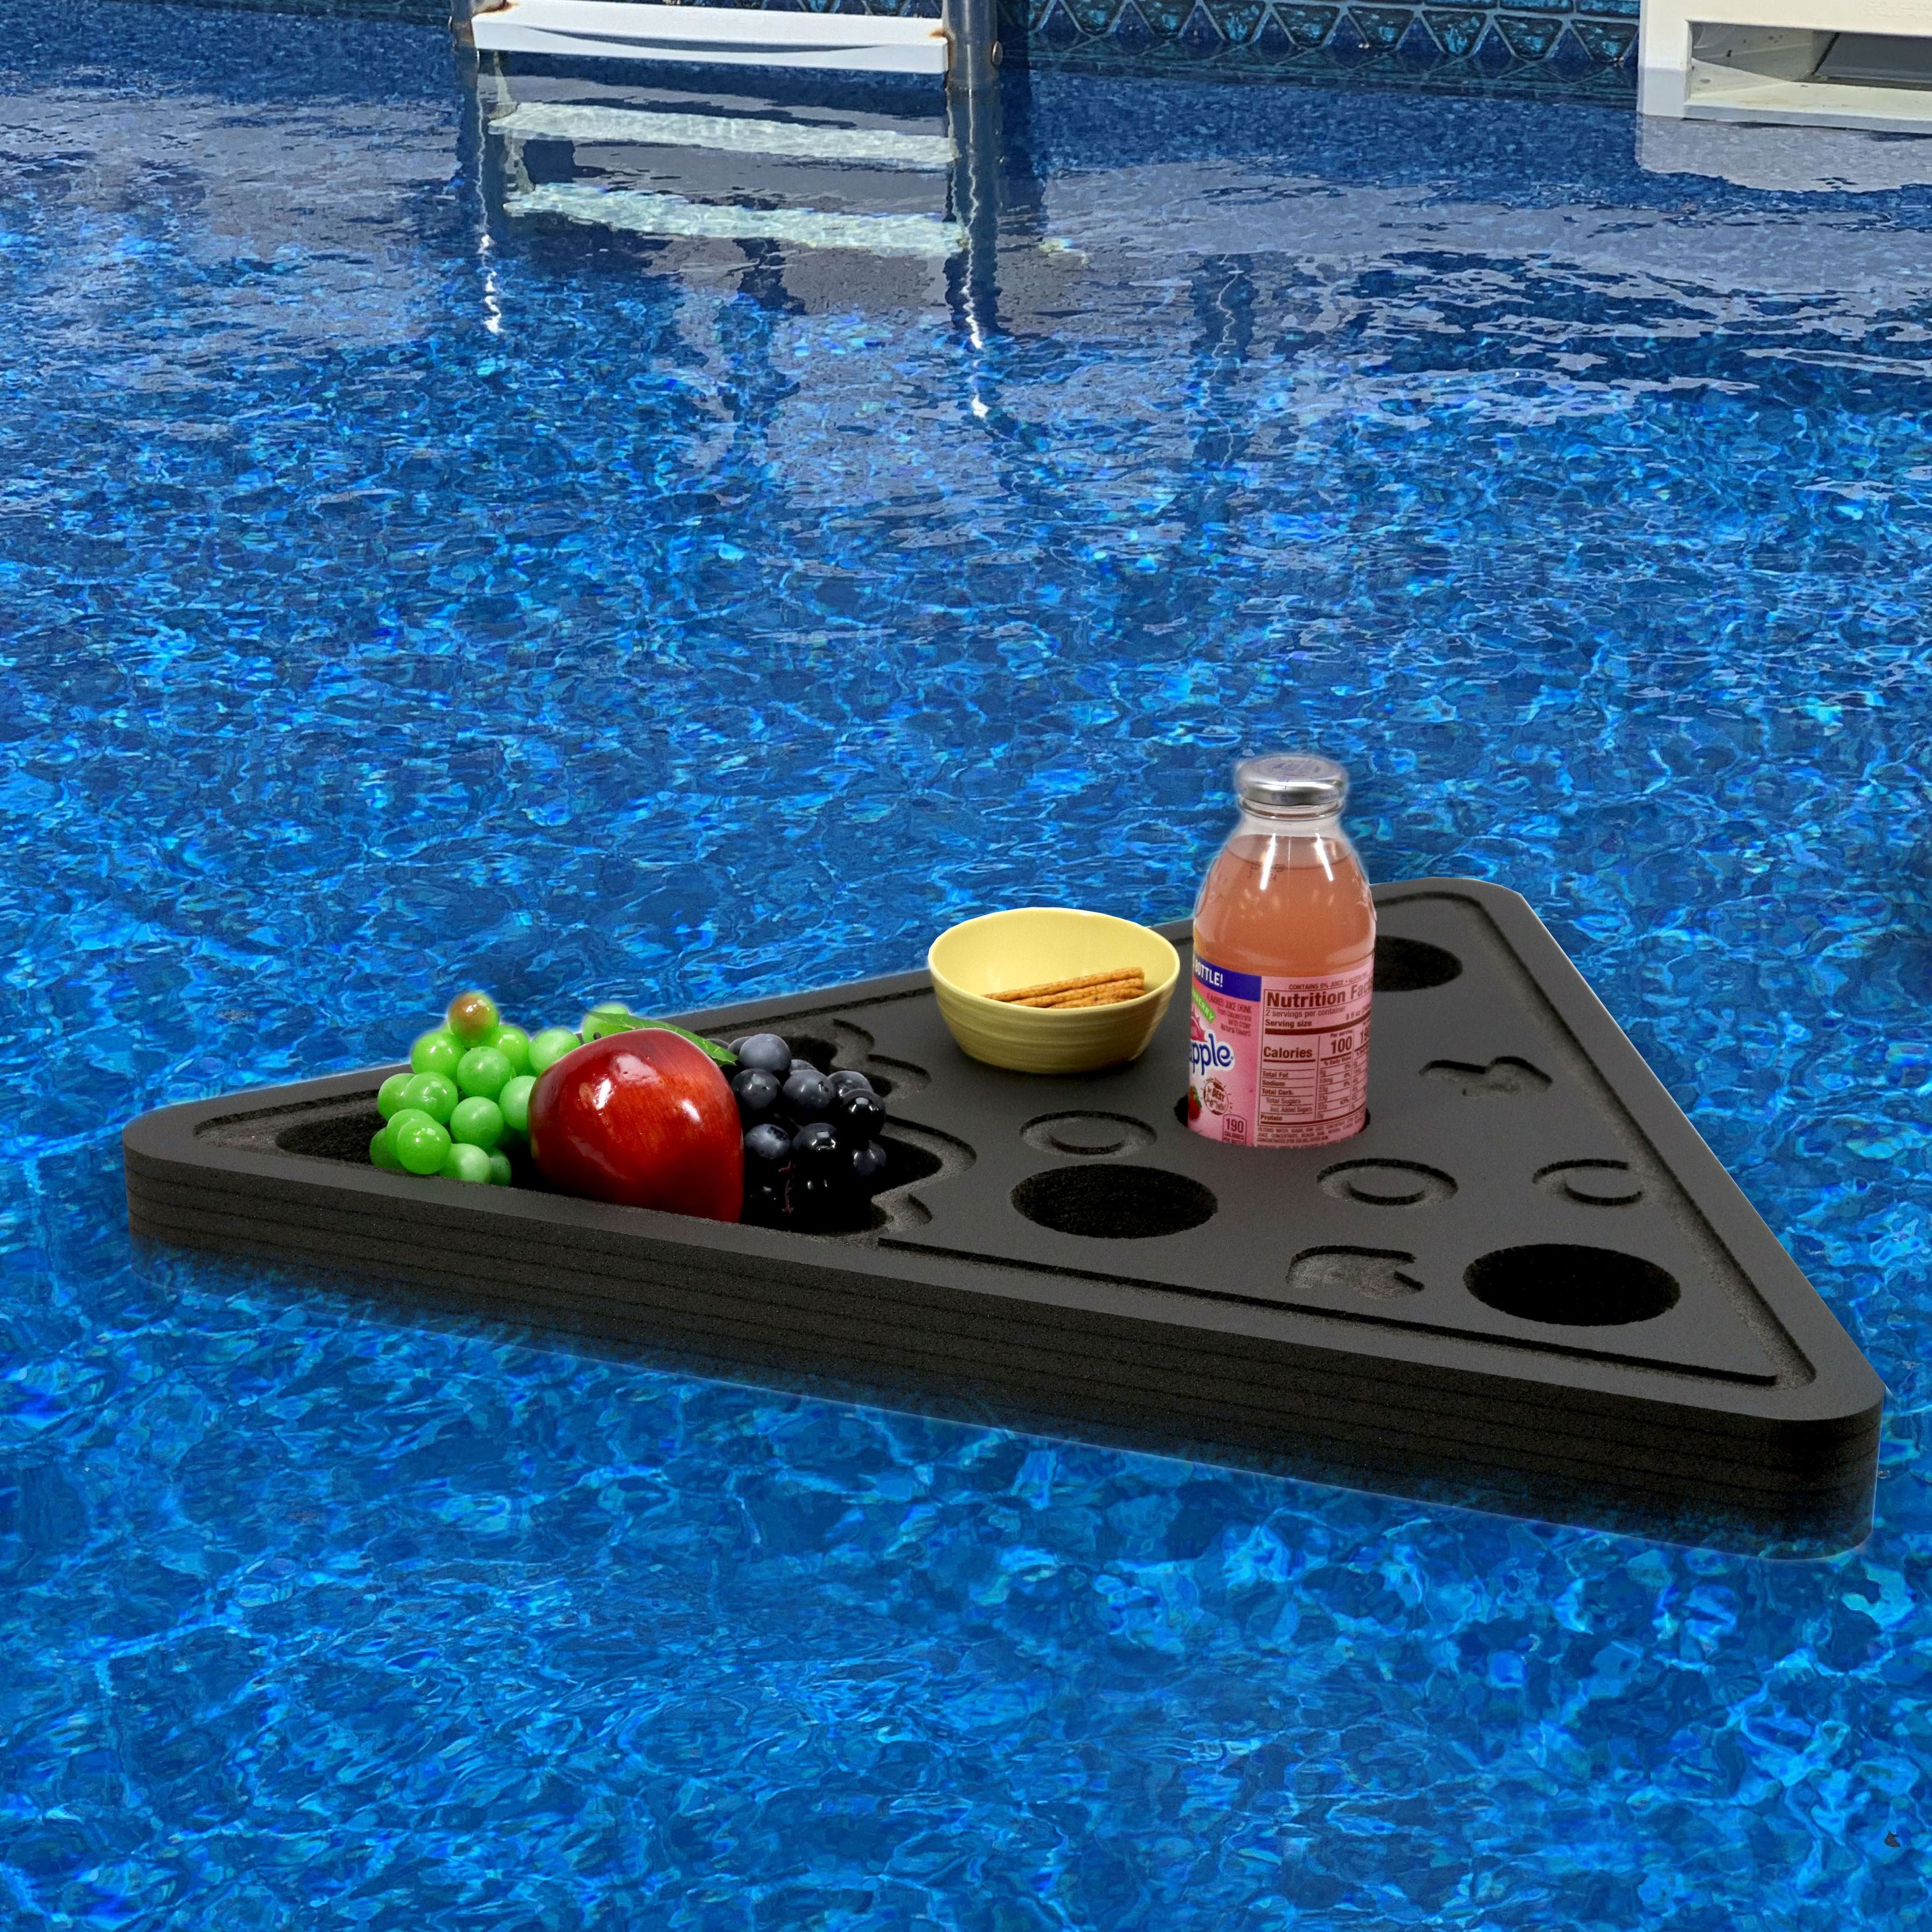 Floating Drink Cup Holder Pool Pizza Slice Shape Black Foam 6 Compartment 2 Feet